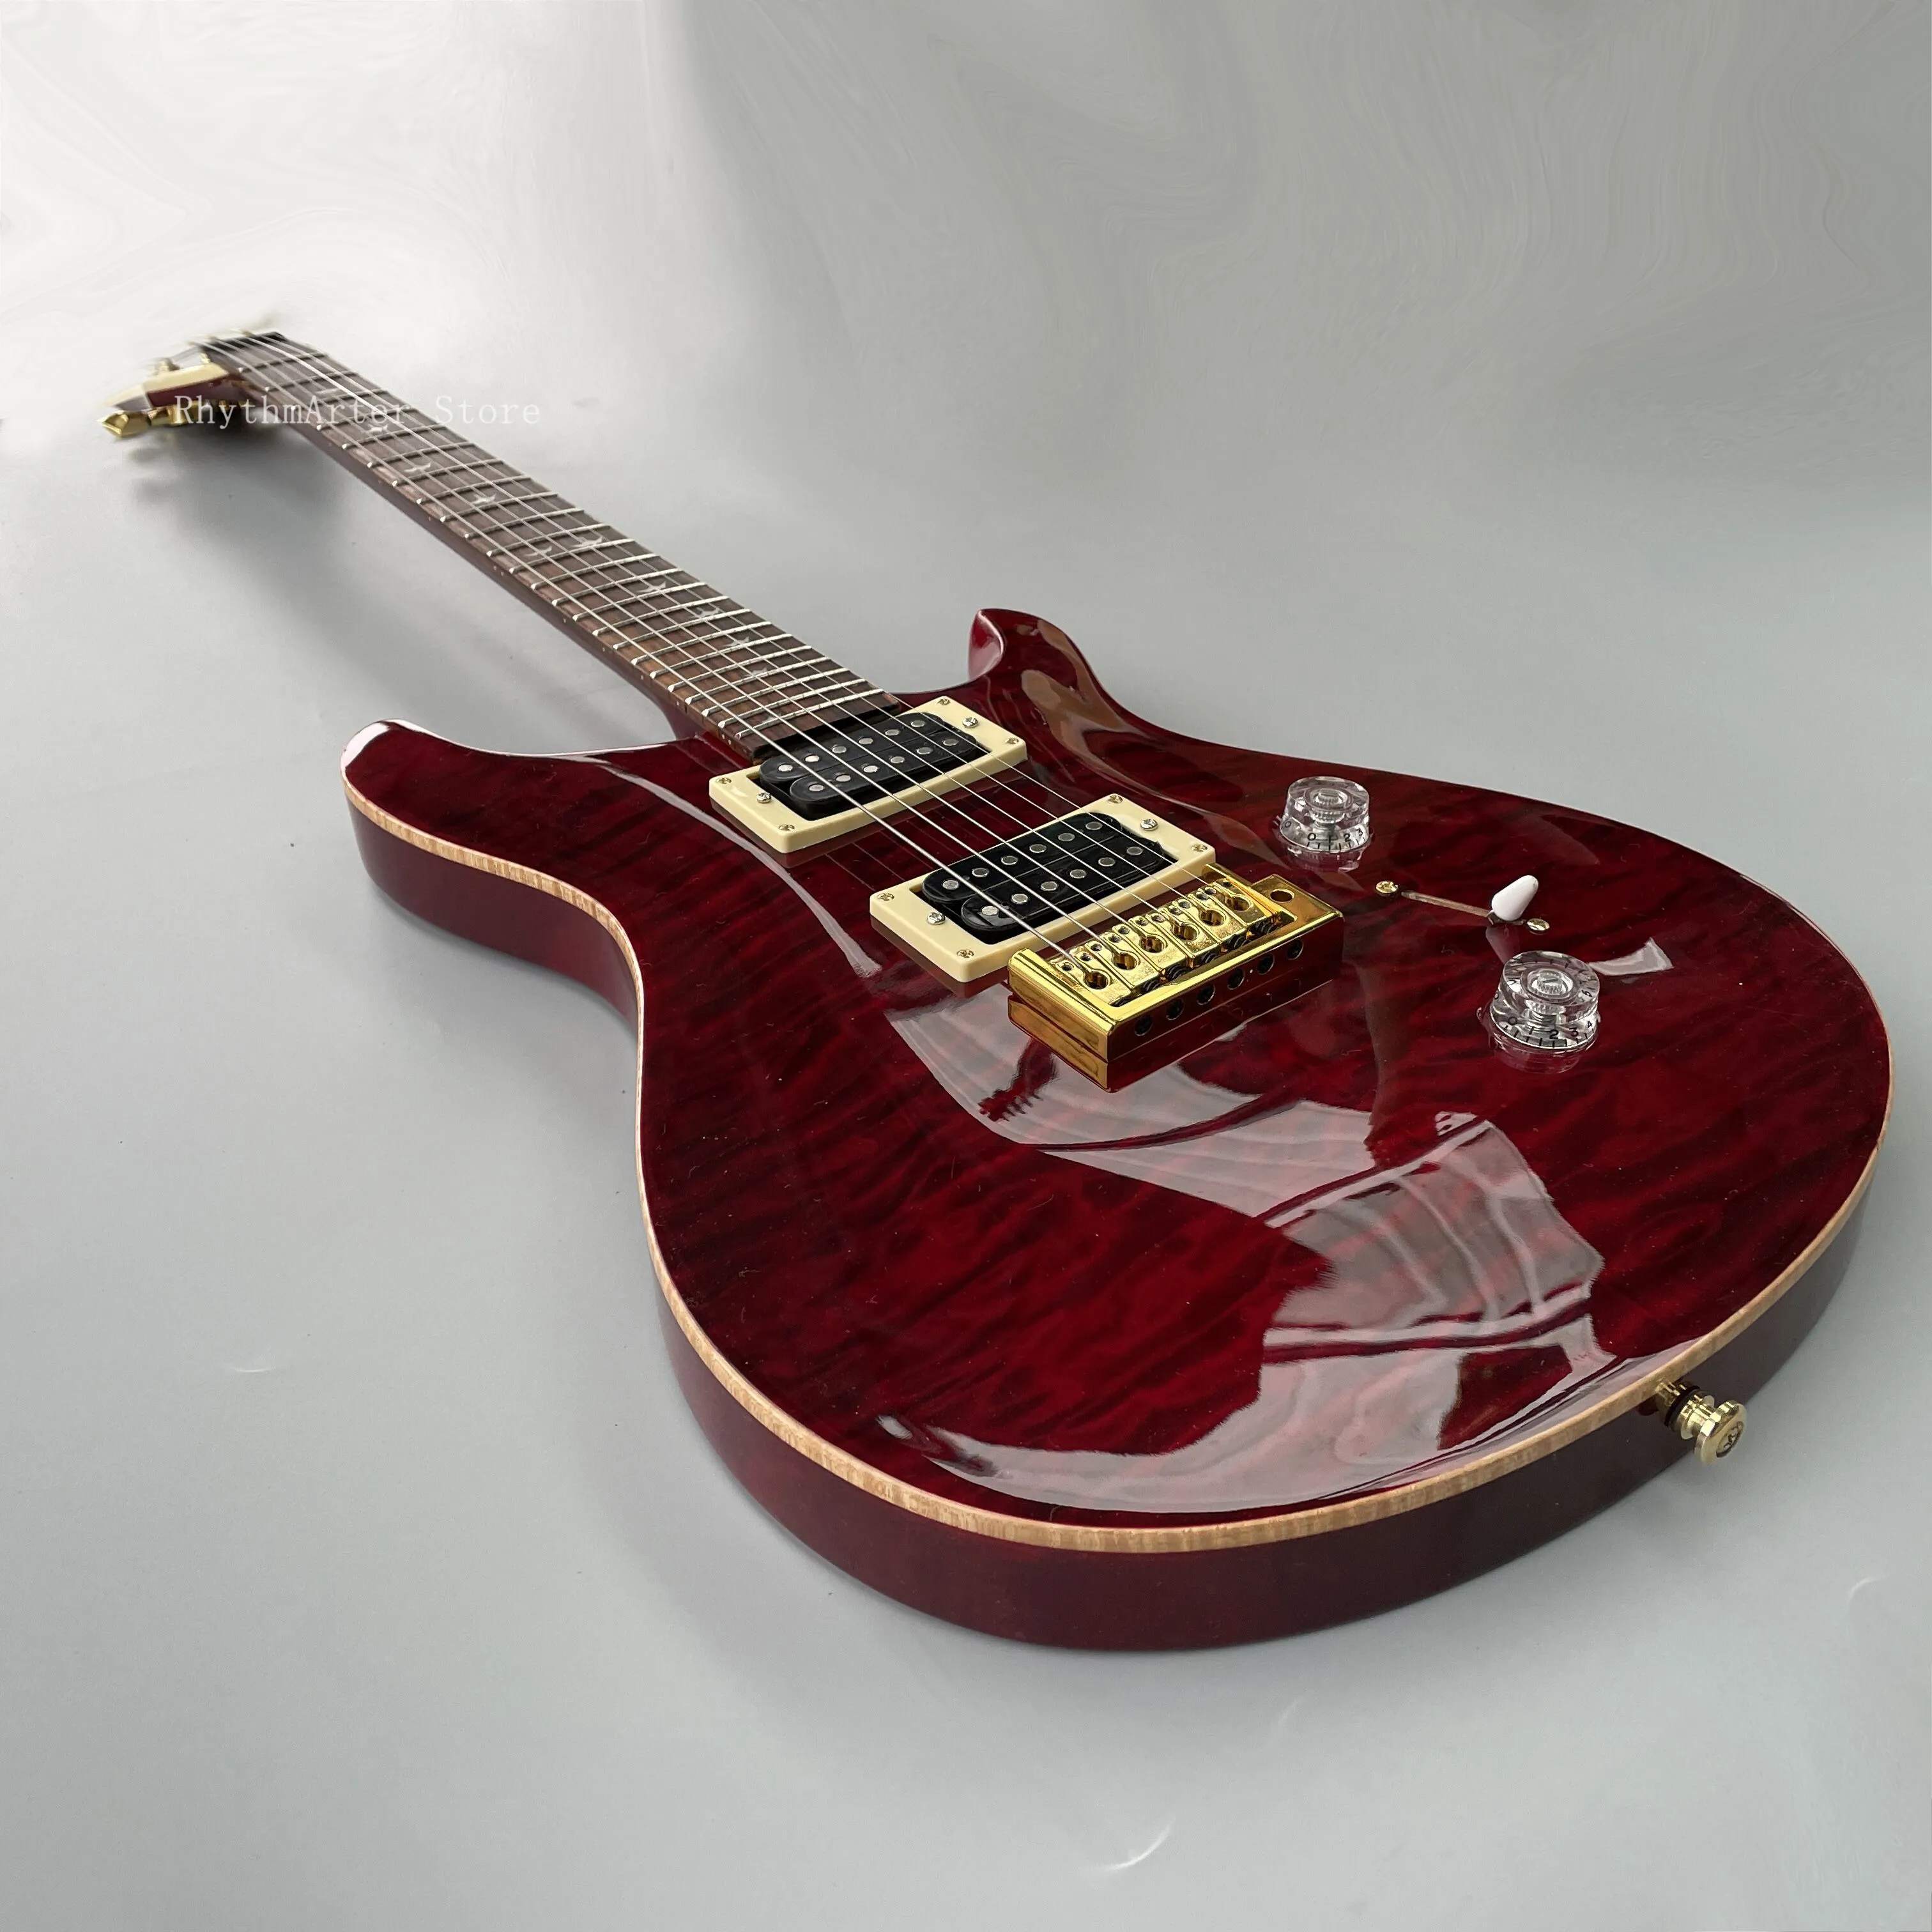 PAUL PRIVATE STOCK 24 FRETS MARD RED QUILTED MAPLE TOP Electric Guitar Double Bud Inlay vid 10: e FRET Tremolo Bridge Gold Hardware